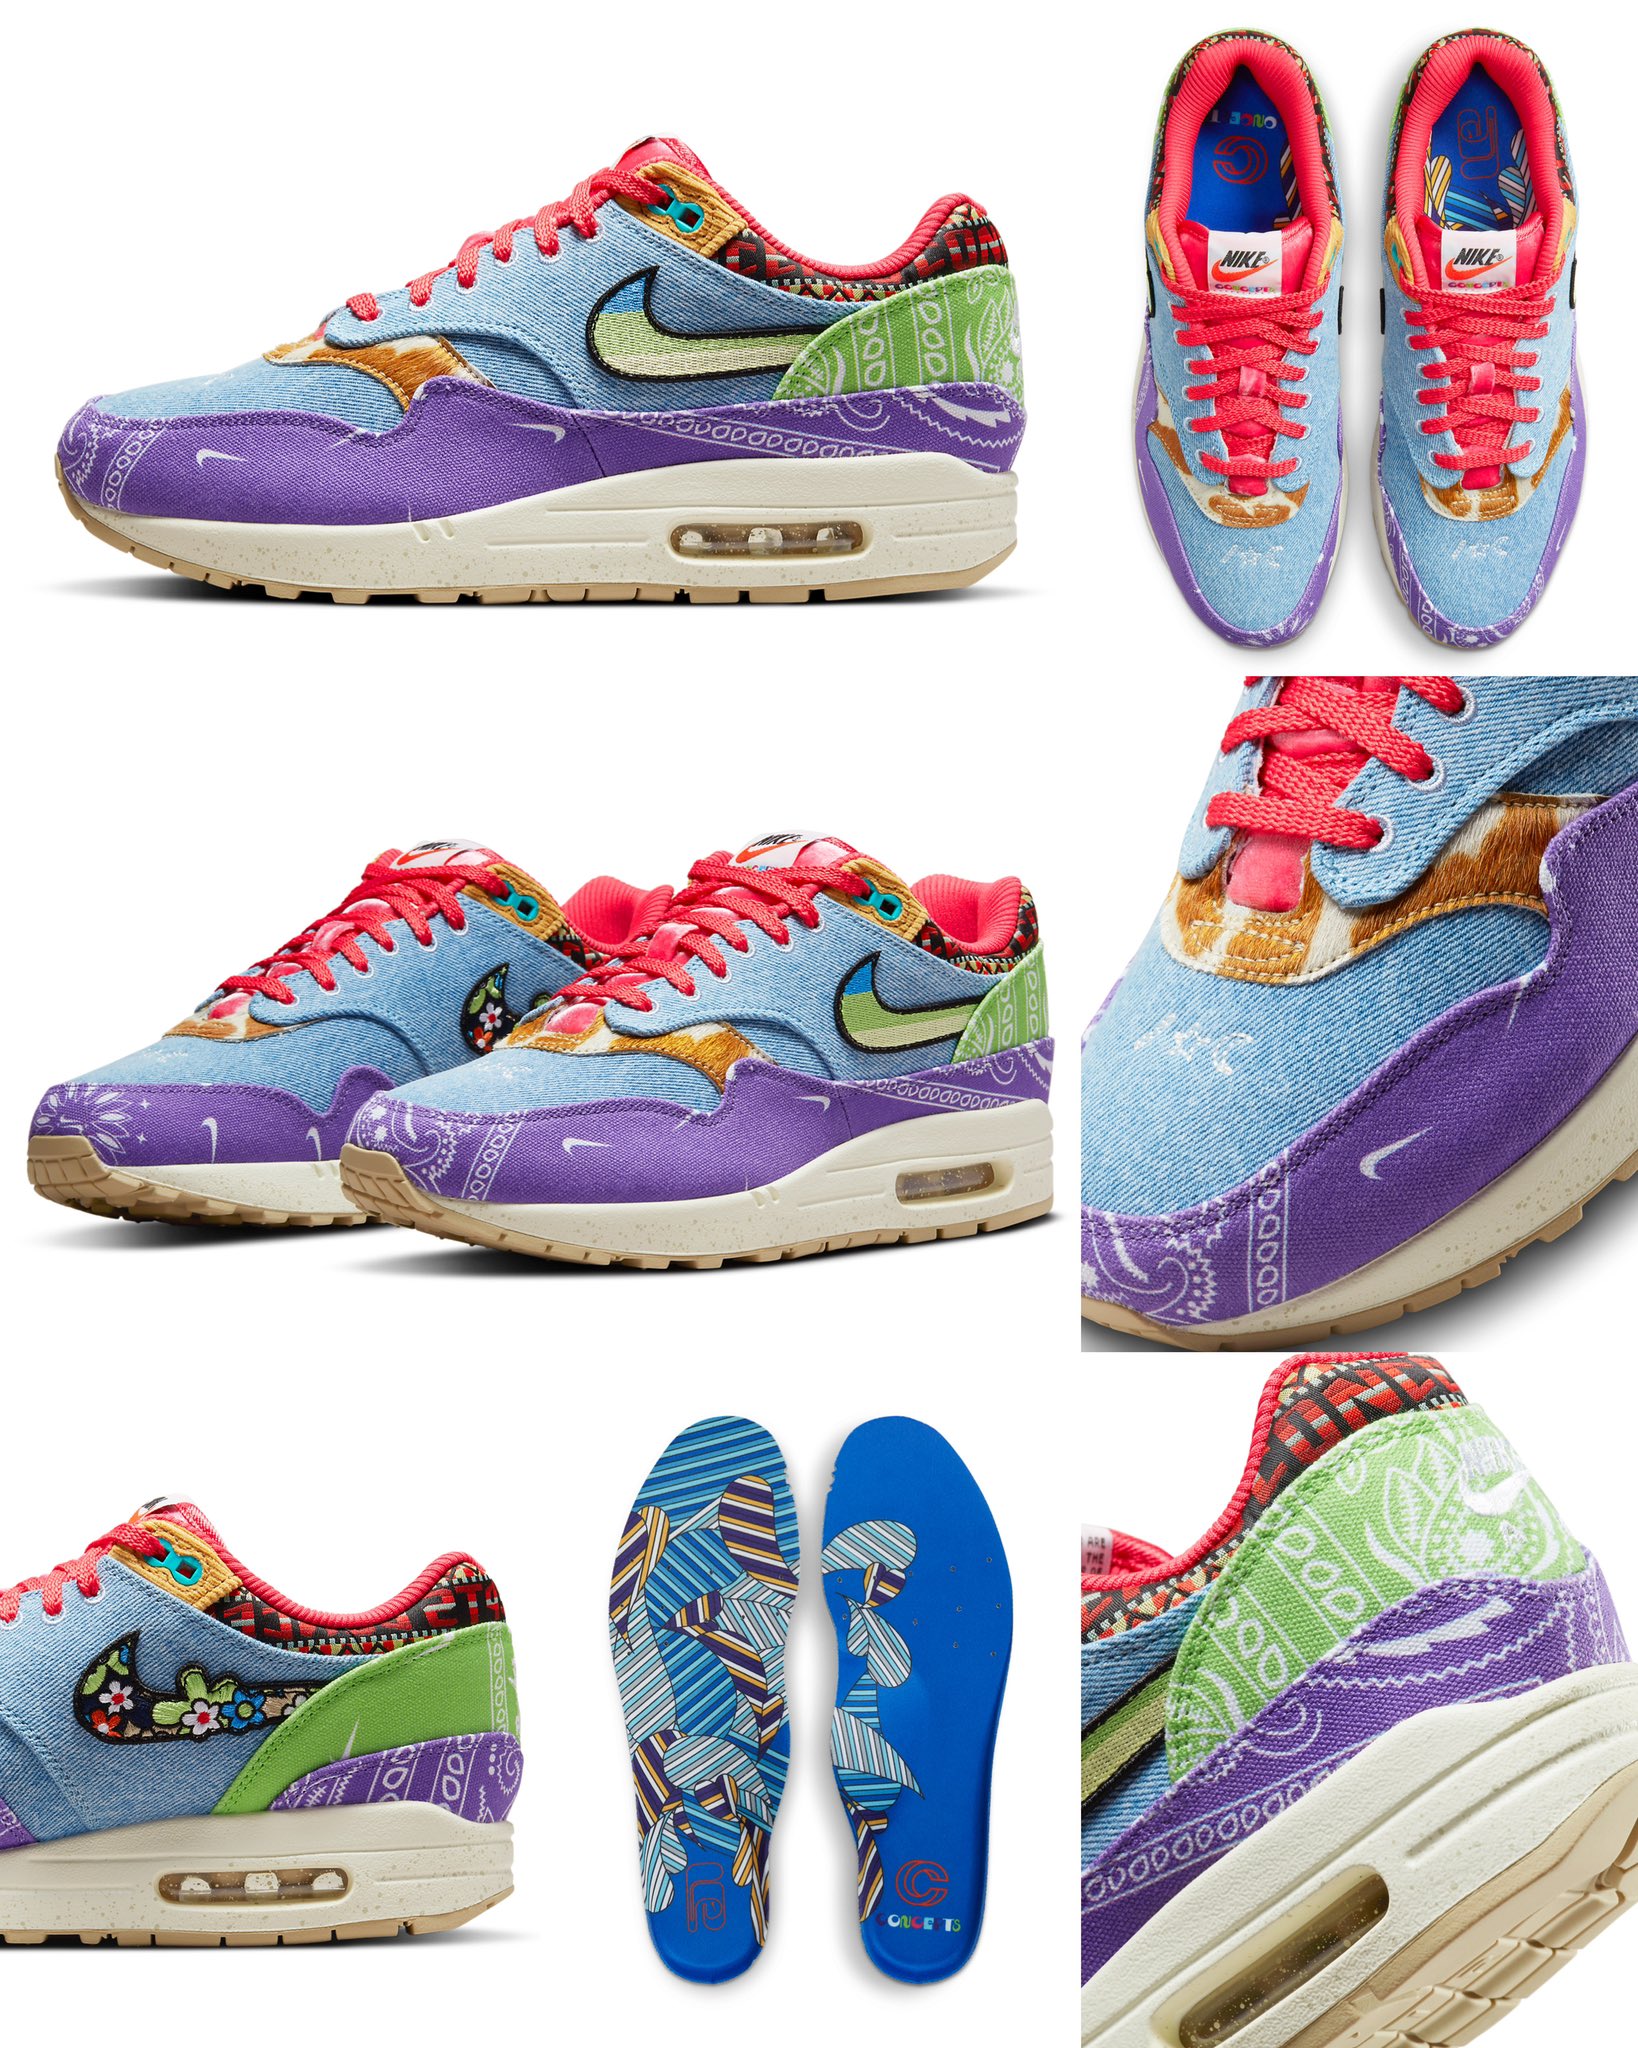 zSneakerHeadz on Twitter: "2022 Concepts Nike Air Max 1 SP official images! 🎨🧶🧵 / Twitter